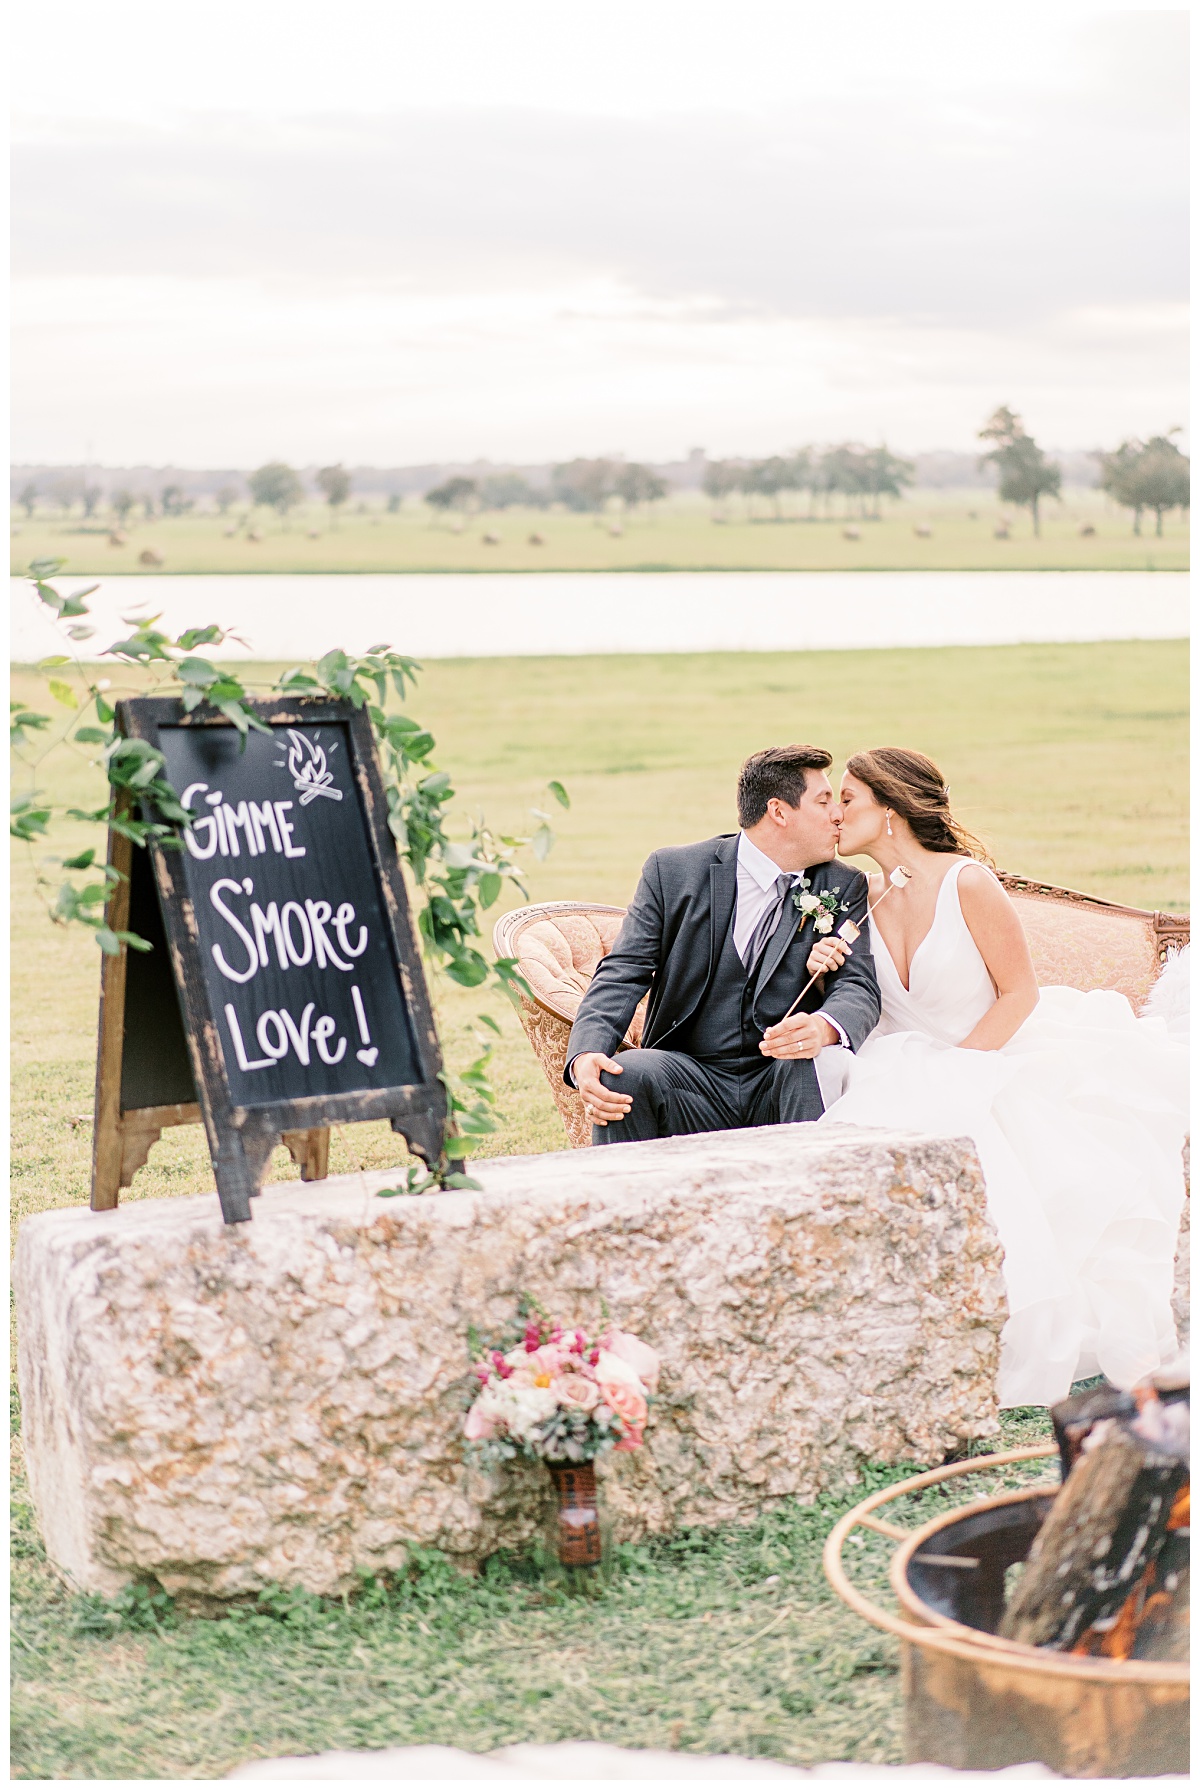 Romancing the country views at Emery's Buffalo Creek | Wild and Lush Photography by Alicia Yarrish Photography 